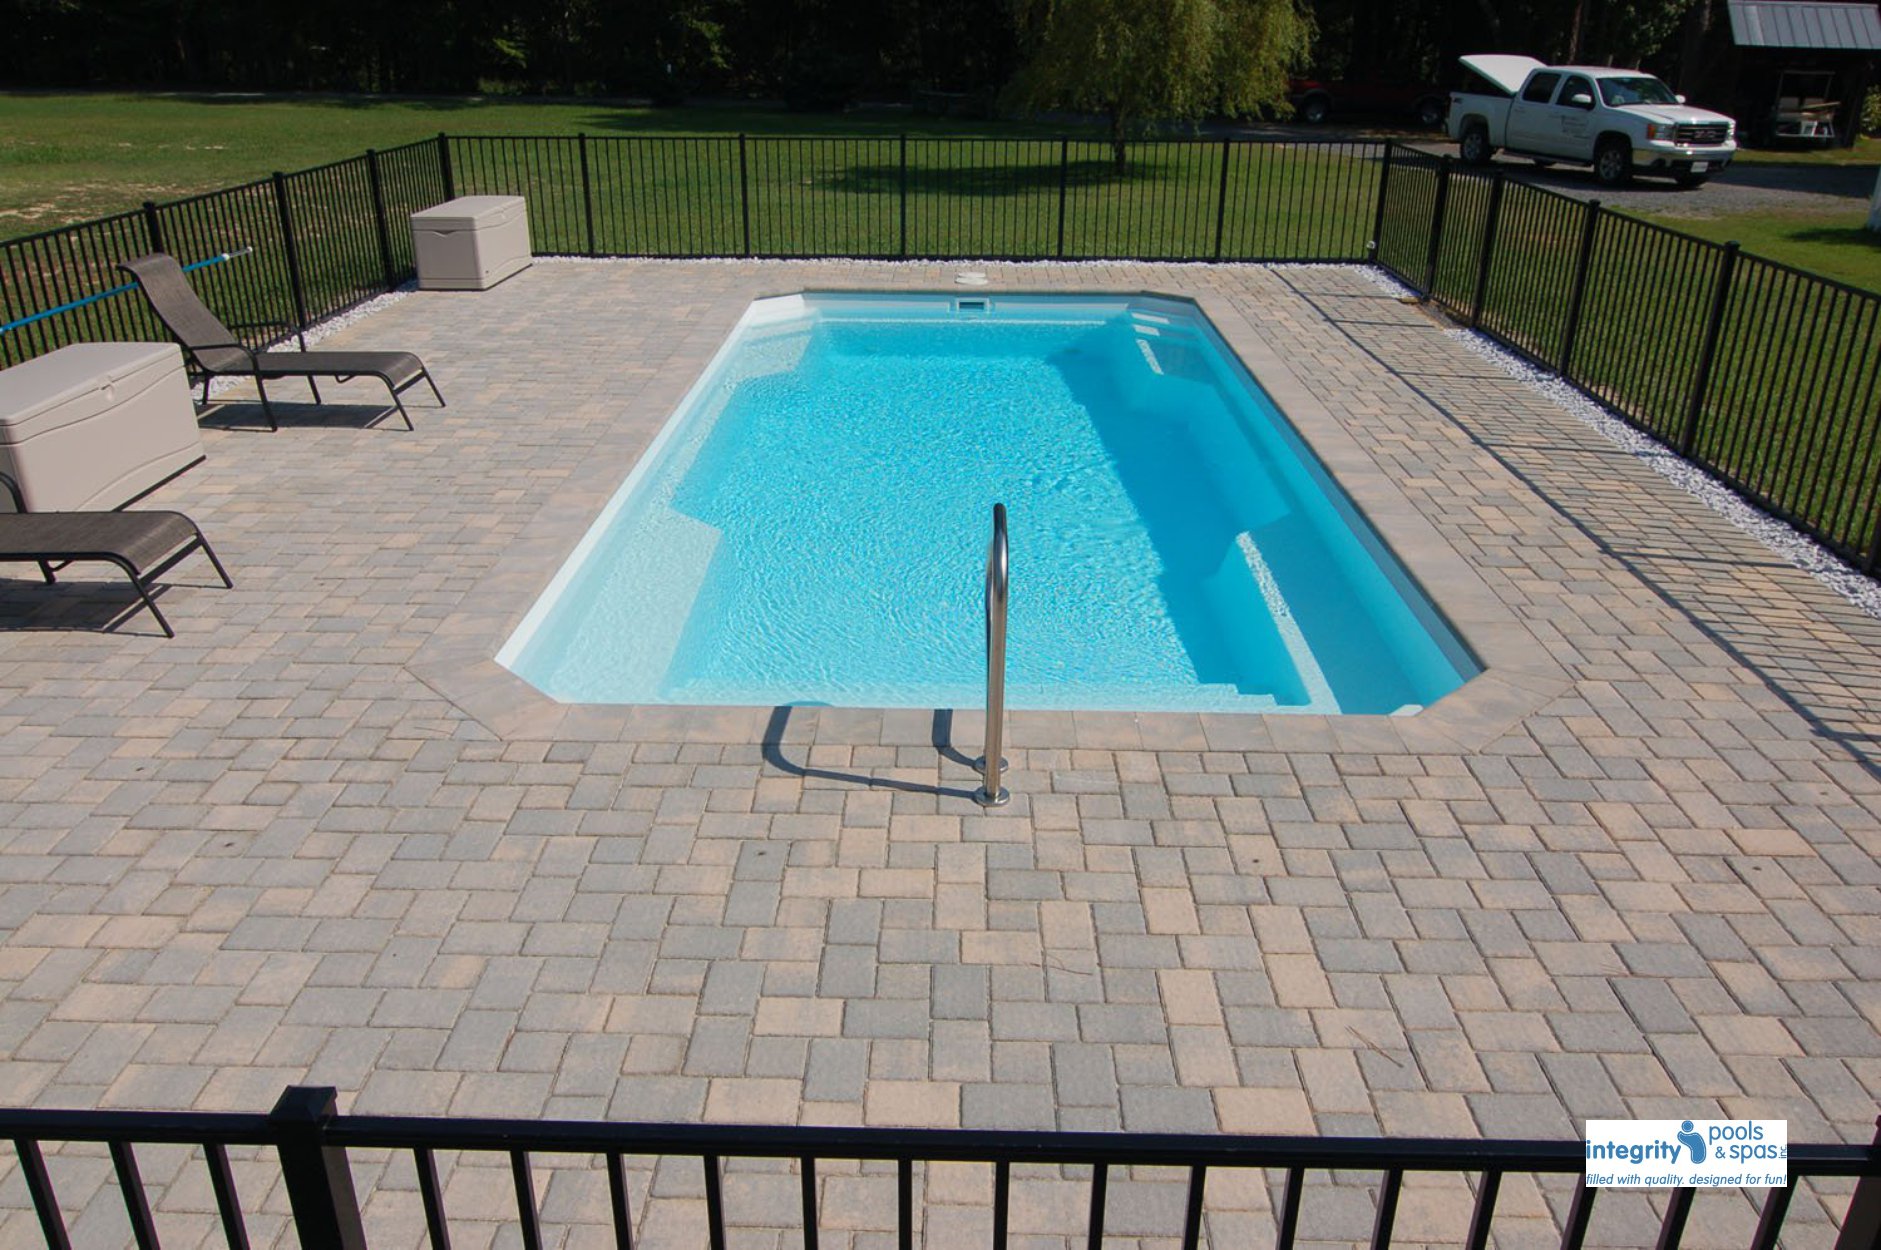 <div class='closebutton' onclick='return hs.close(this)' title='Close'></div><div class='firstH'><img src='images/logo-white-small.png'></div><h1>Rendezvous</h1><p>The Rendezvous in-ground fiberglass pool by Riviera Fiberglass Pools Offered by Fun and Fit Pools and Spas (Photo #002).<p>Available Sizes:</p><ul><li>35' 1'' x 13' 9''</li><li>29' x 13' 9''</li><li>23' x 11' 8''</li></ul></p><div class='getSocial'><h1>Share</h1><p class='photoBy'>Photo by Fun and Fit Pools and Spas</p><iframe src='http://www.facebook.com/plugins/like.php?href=http%3A%2F%2Ffunandfitpools.com%2Fimages%2Fgalleries%2Fin-ground-pools%2Frendezvous%2Fwm%2F002.jpg&send=false&layout=button_count&width=100&show_faces=false&action=like&colorscheme=light&font&height=21' scrolling='no' frameborder='0' style='border:none; overflow:hidden; width:100px; height:21px;' allowTransparency='true'></iframe><br><a href='http://pinterest.com/pin/create/button/?url=http%3A%2F%2Fwww.funandfitpools.com&media=http%3A%2F%2Fwww.funandfitpools.com%2Fimages%2Fgalleries%2Fin-ground-pools%2Frendezvous%2Fwm%2F002.jpg&description=Pools' data-pin-do='buttonPin' data-pin-config=\'above\'><img src='http://assets.pinterest.com/images/pidgets/pin_it_button.png' /></a><br></div>